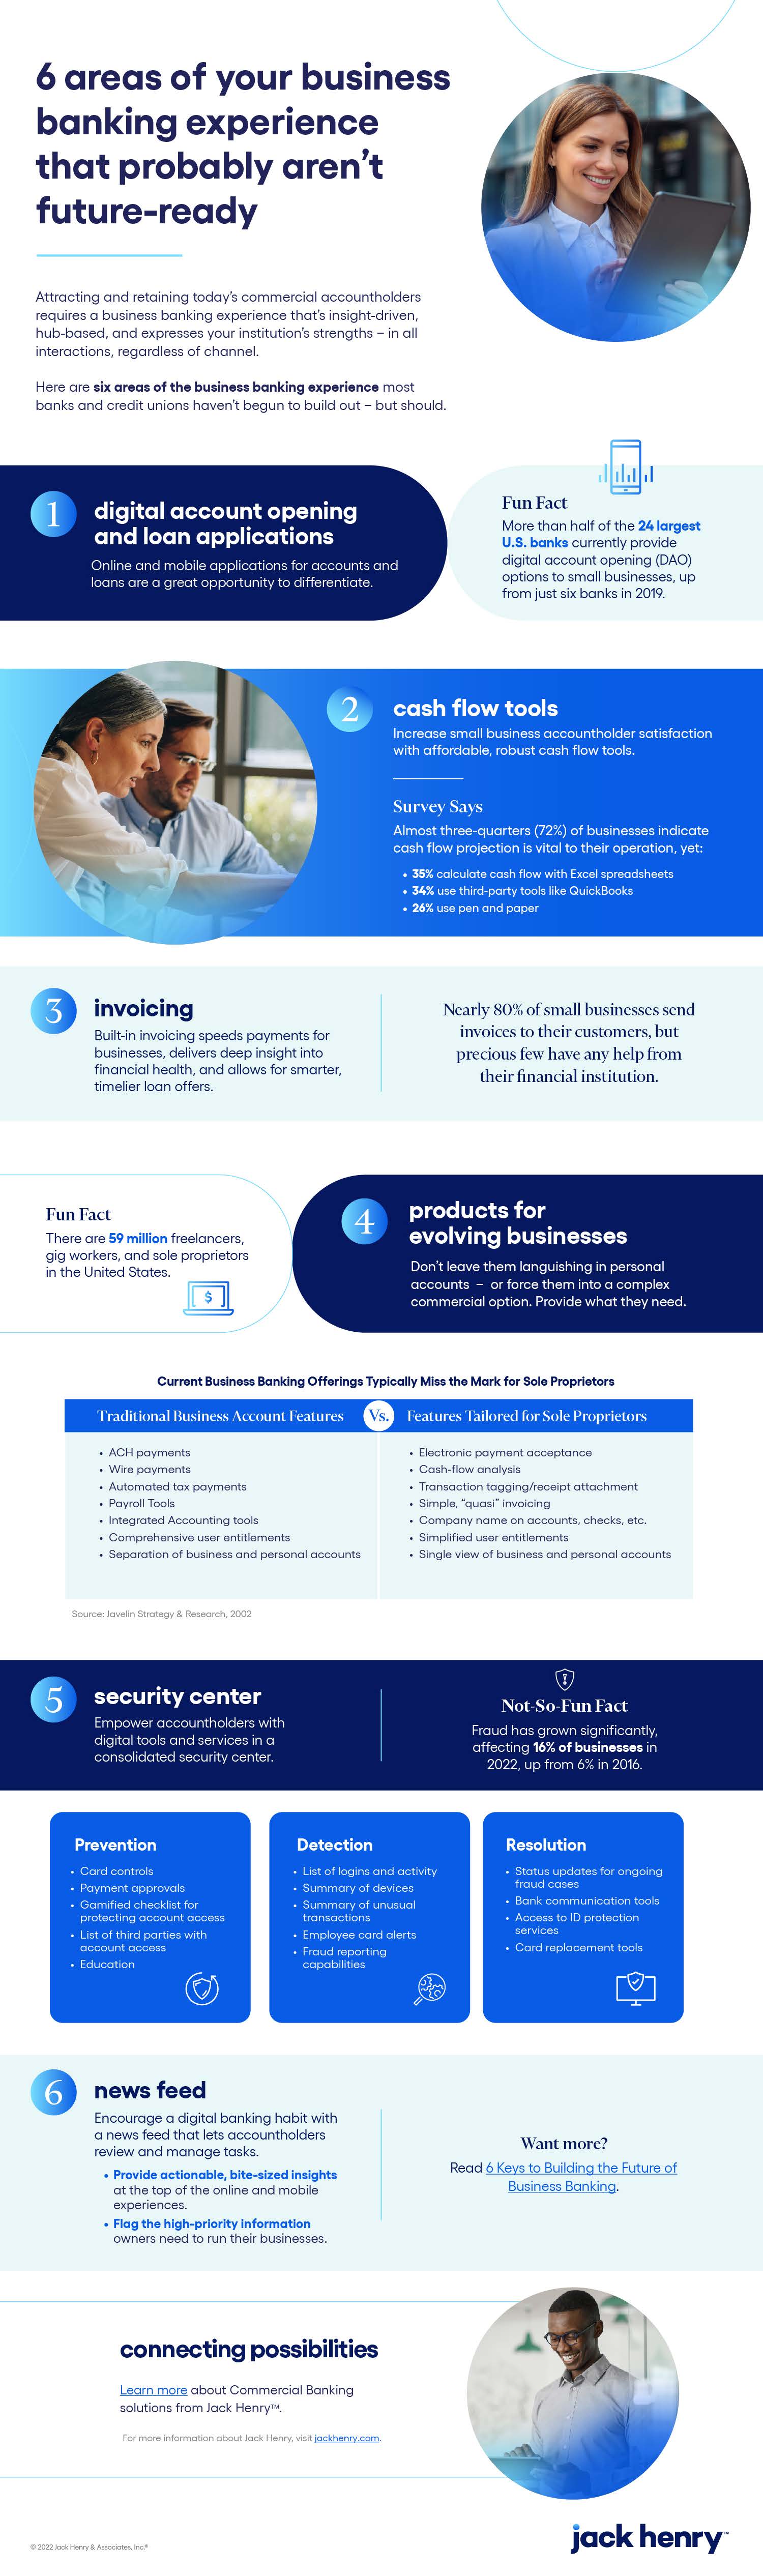 jh-Infographic-business-challenge-six-areas-of-business-banking